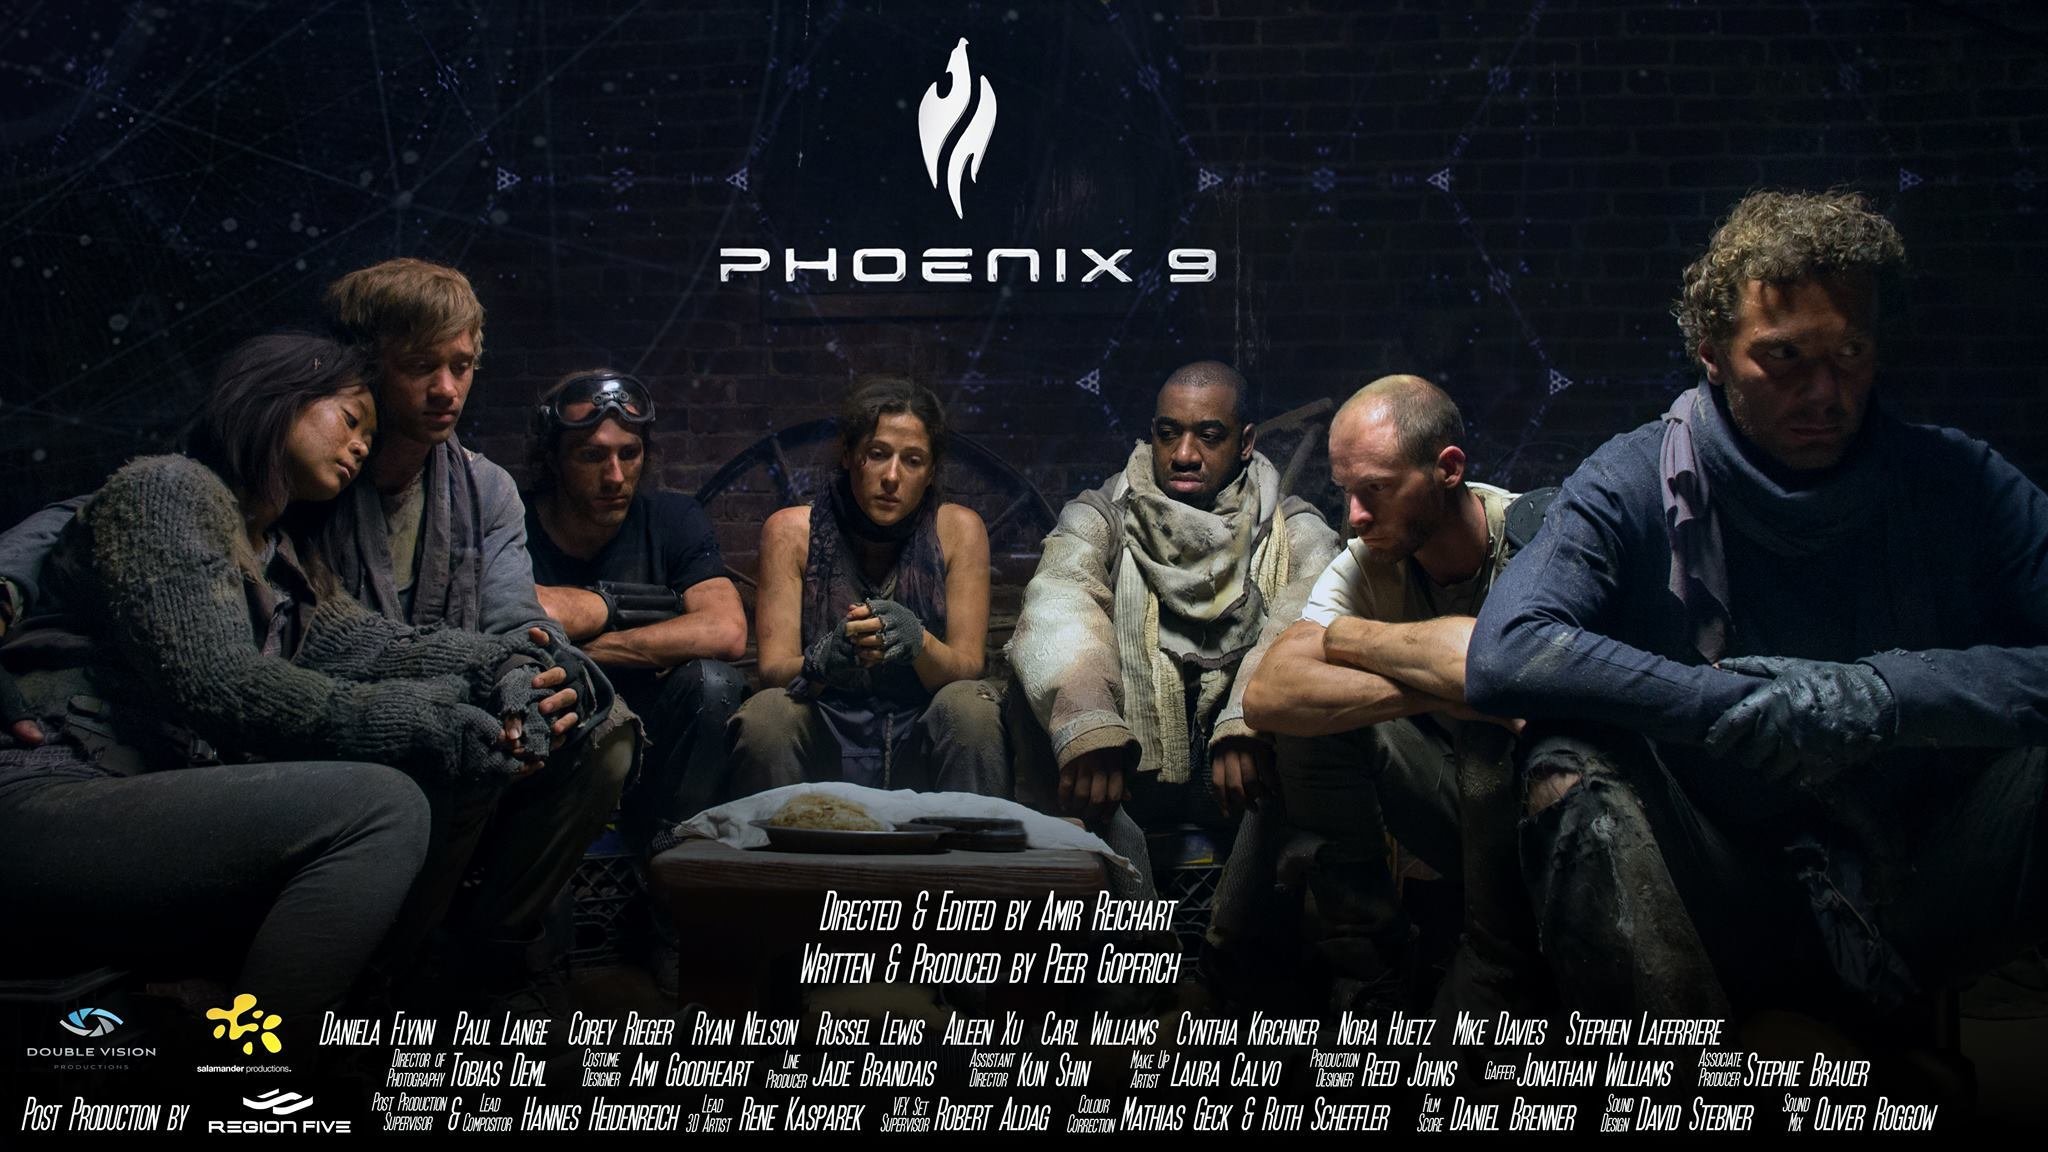 The post-apocalyptic group of survivors in Phoenix 9.